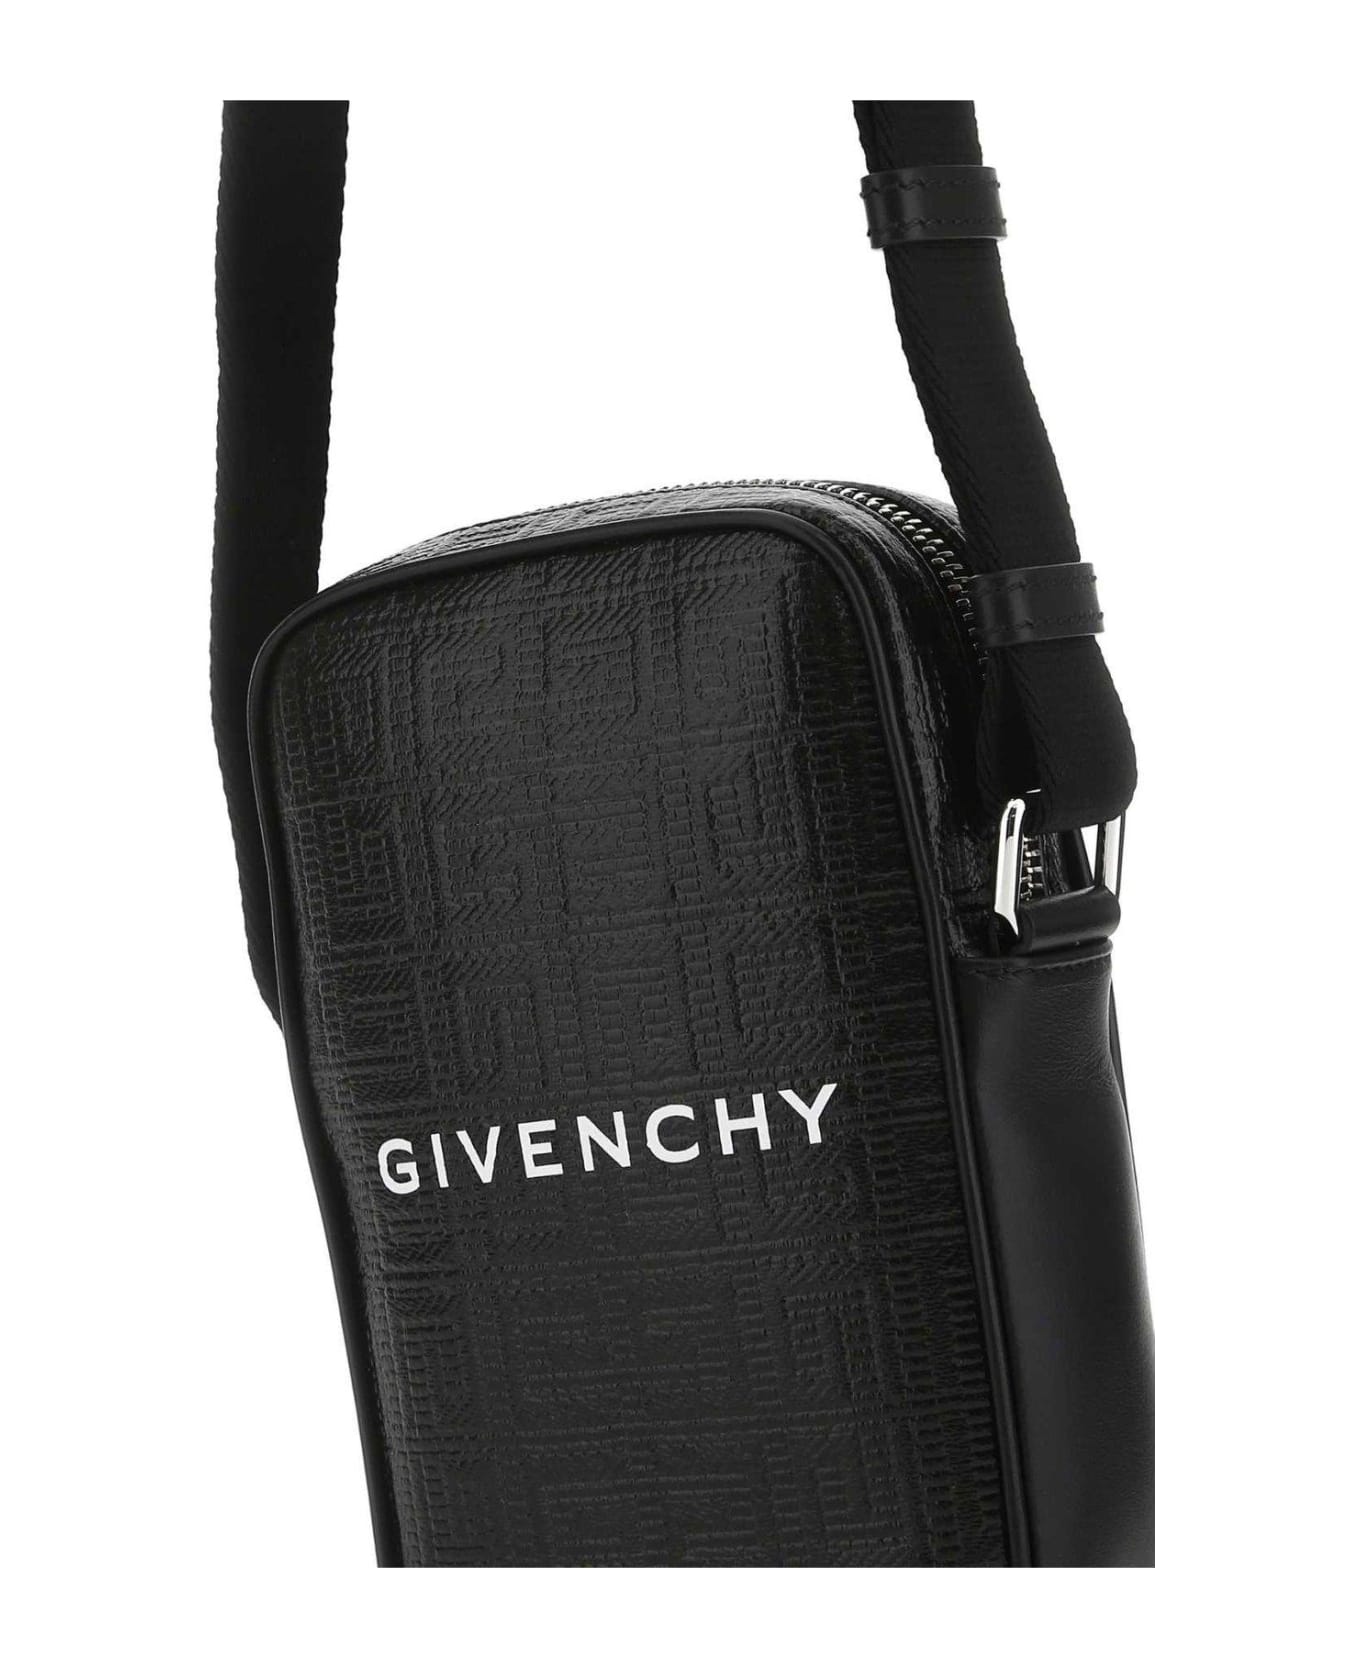 Givenchy 4g Motif Smartphone Pouch - BLACK